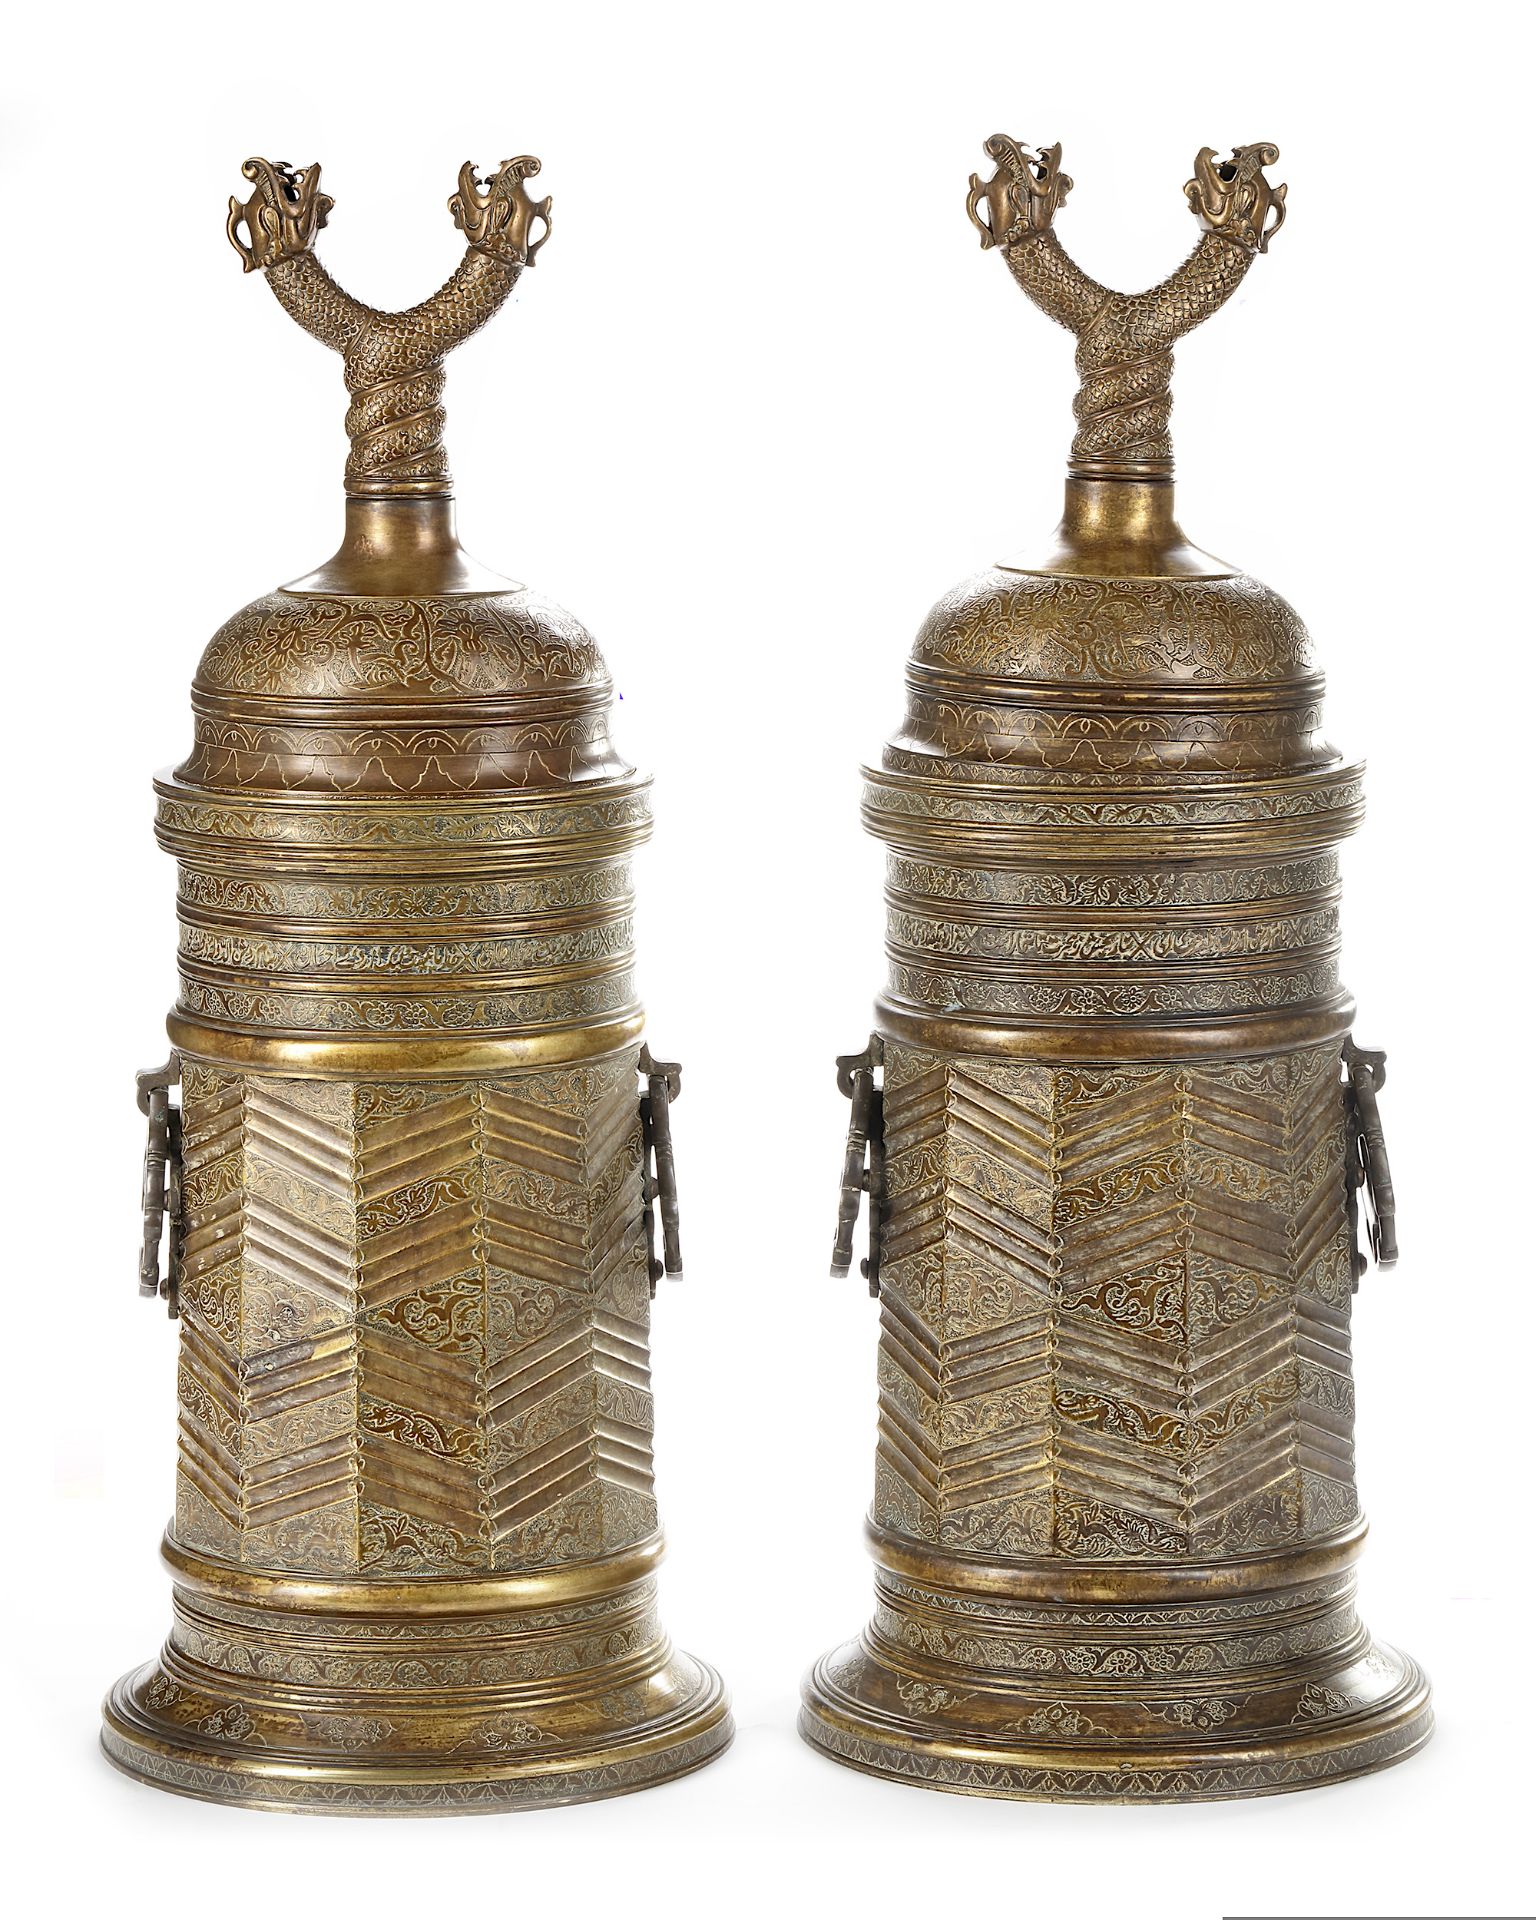 A PAIR OF LARGE SAFAVID STYLE ENGRAVED BRASS TORCH STANDS, PERSIA, 18TH-19TH CENTURY - Image 5 of 5